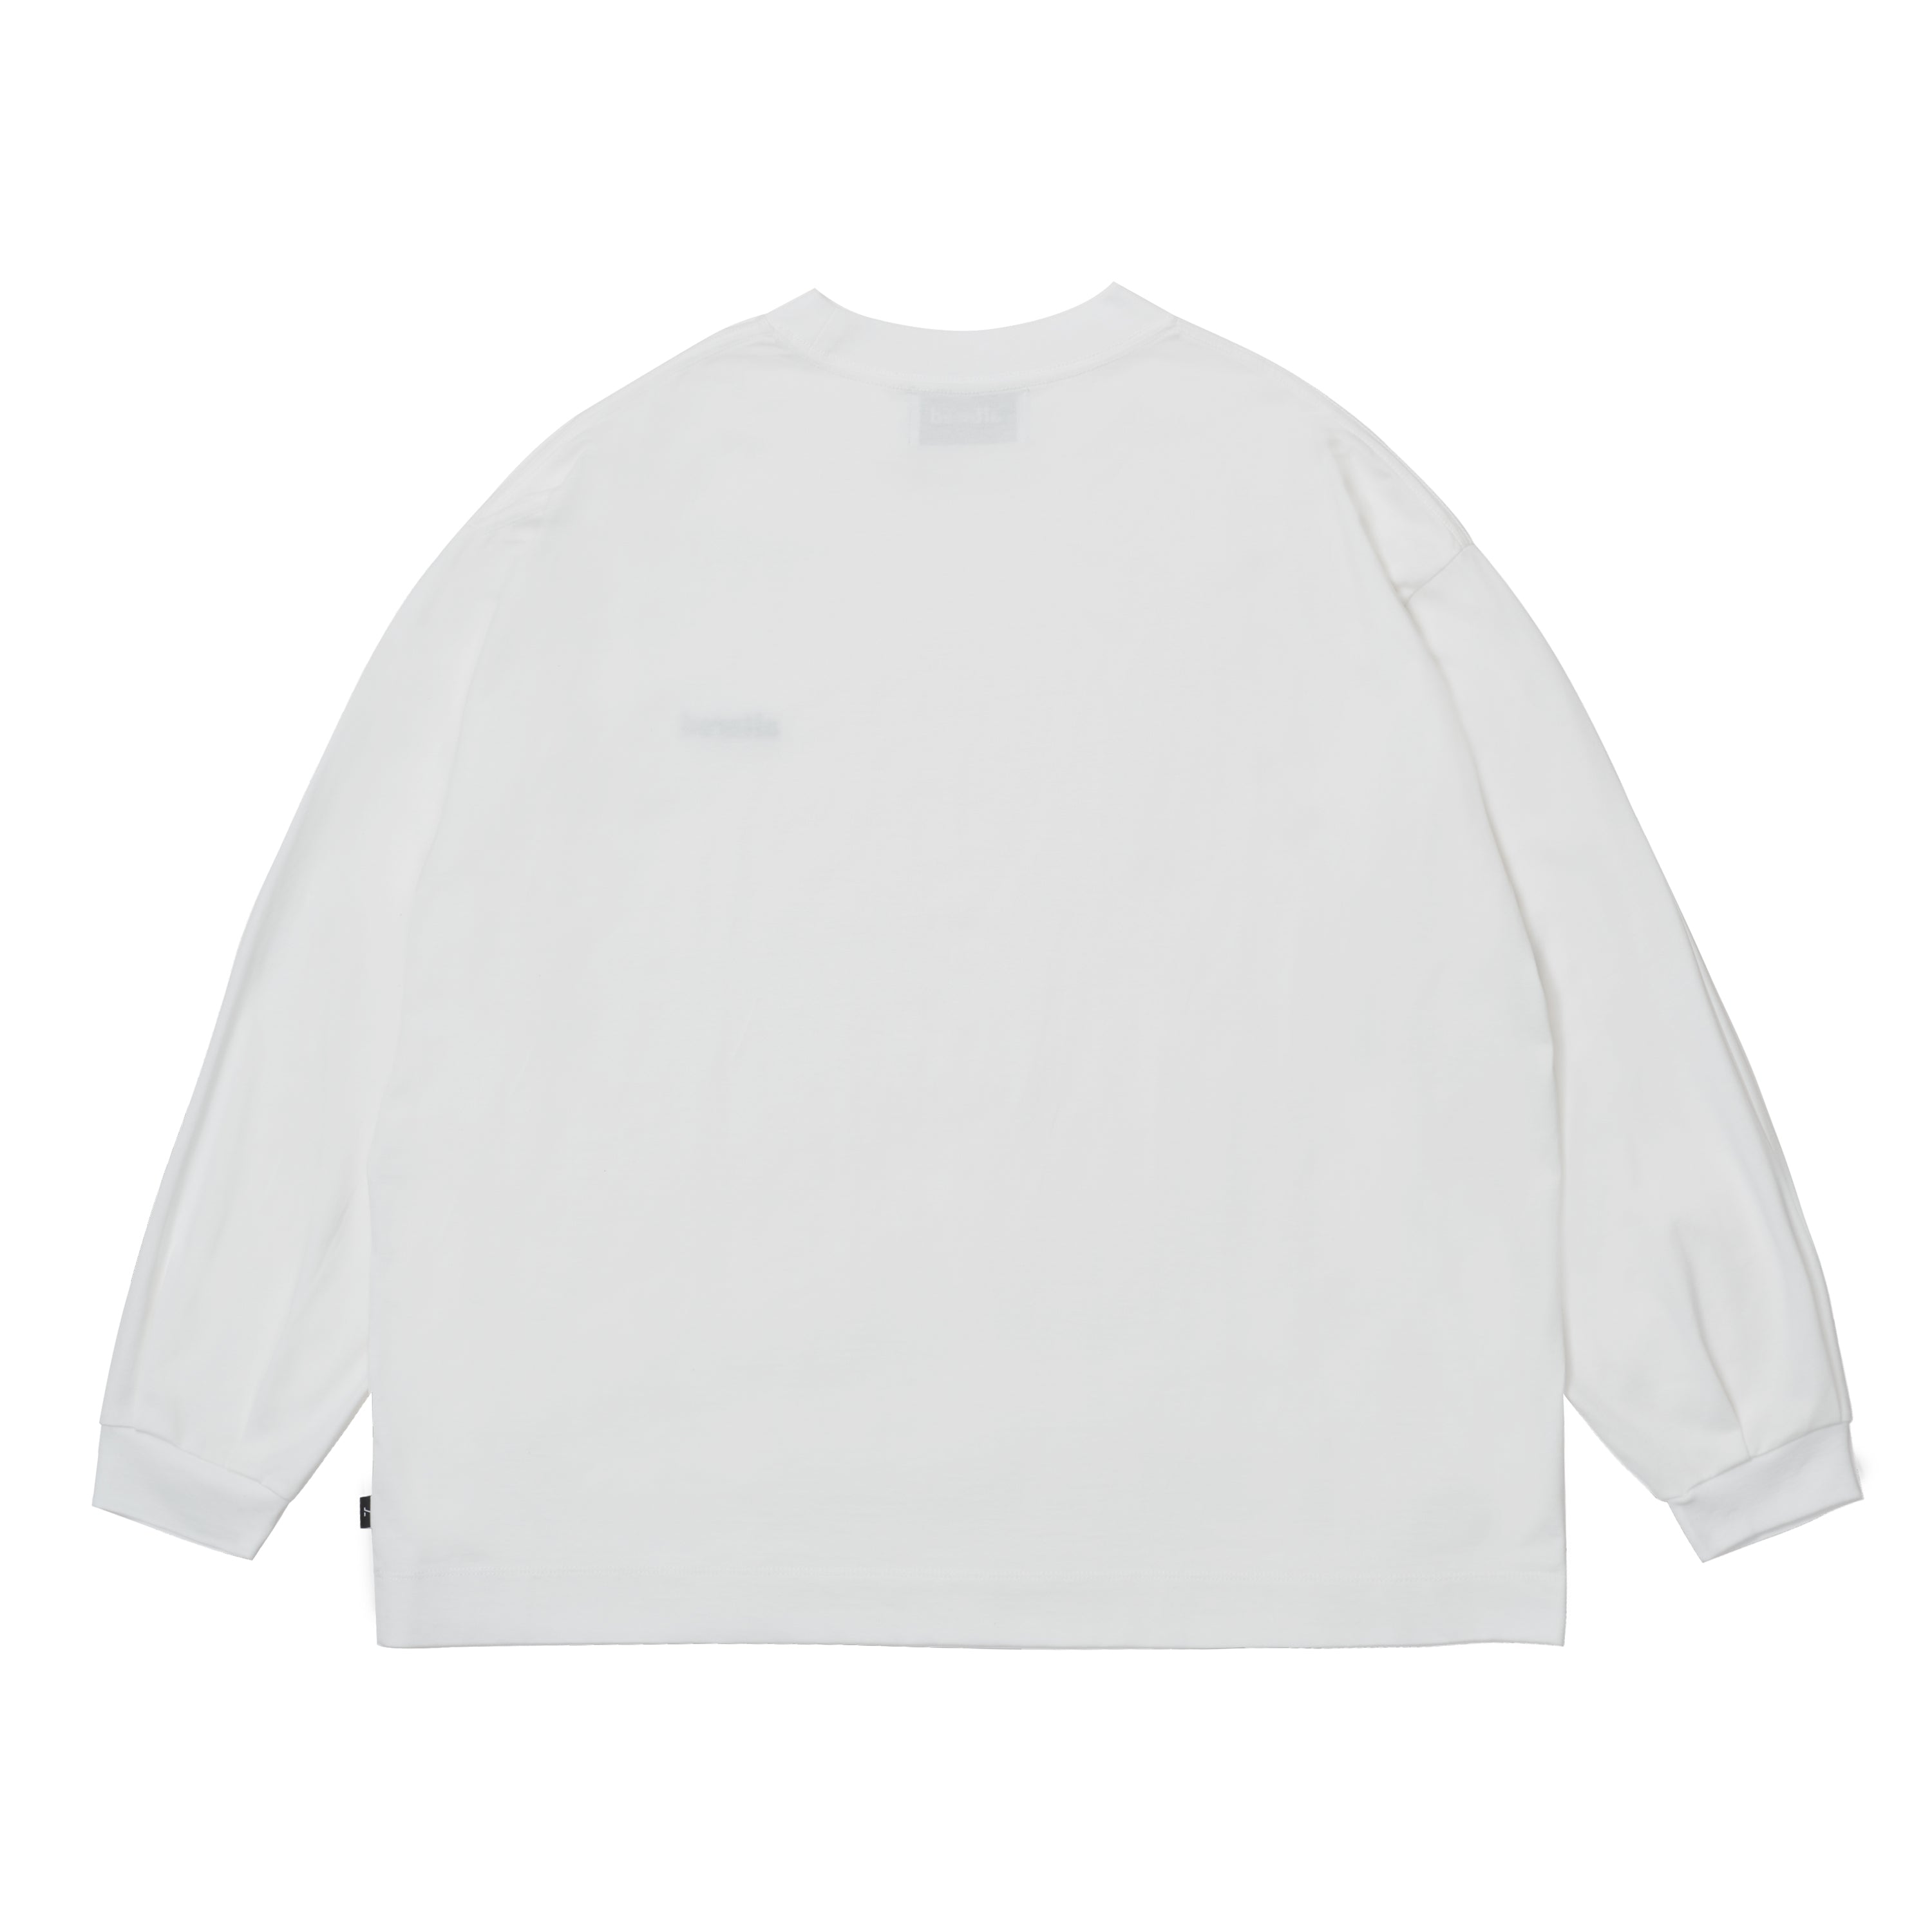 altared/Logo 3D Embroidery Organic Cotton Pleated Sleeve L/S T-Shirts[WHITE]